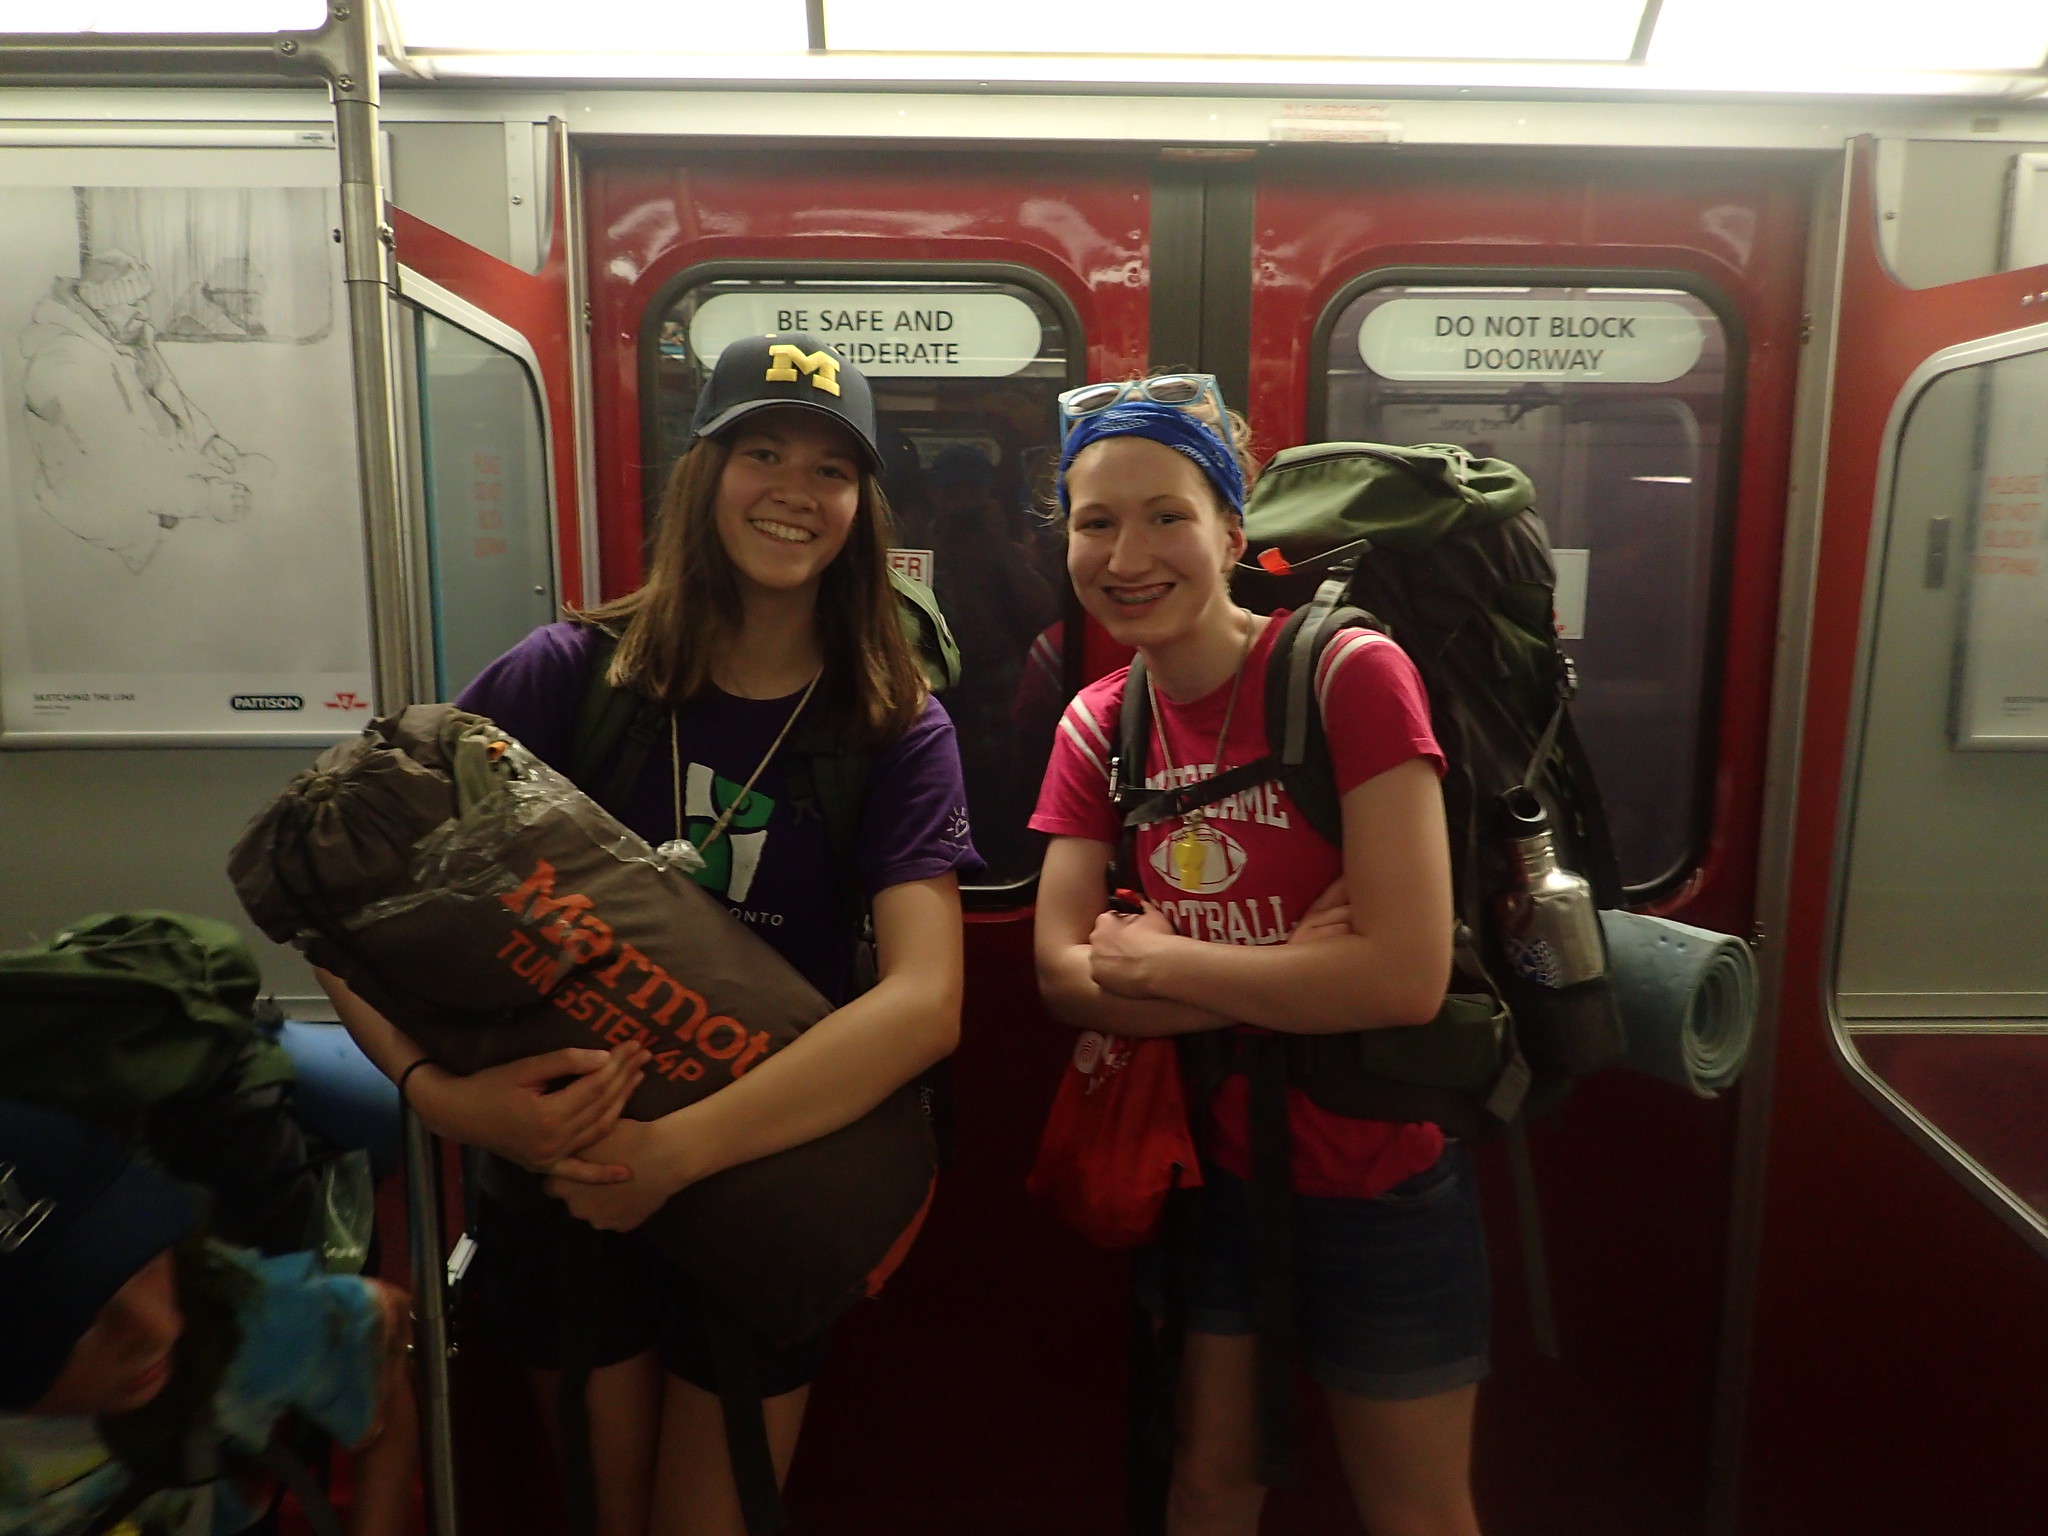 two teens standing with camp gear on the TTC